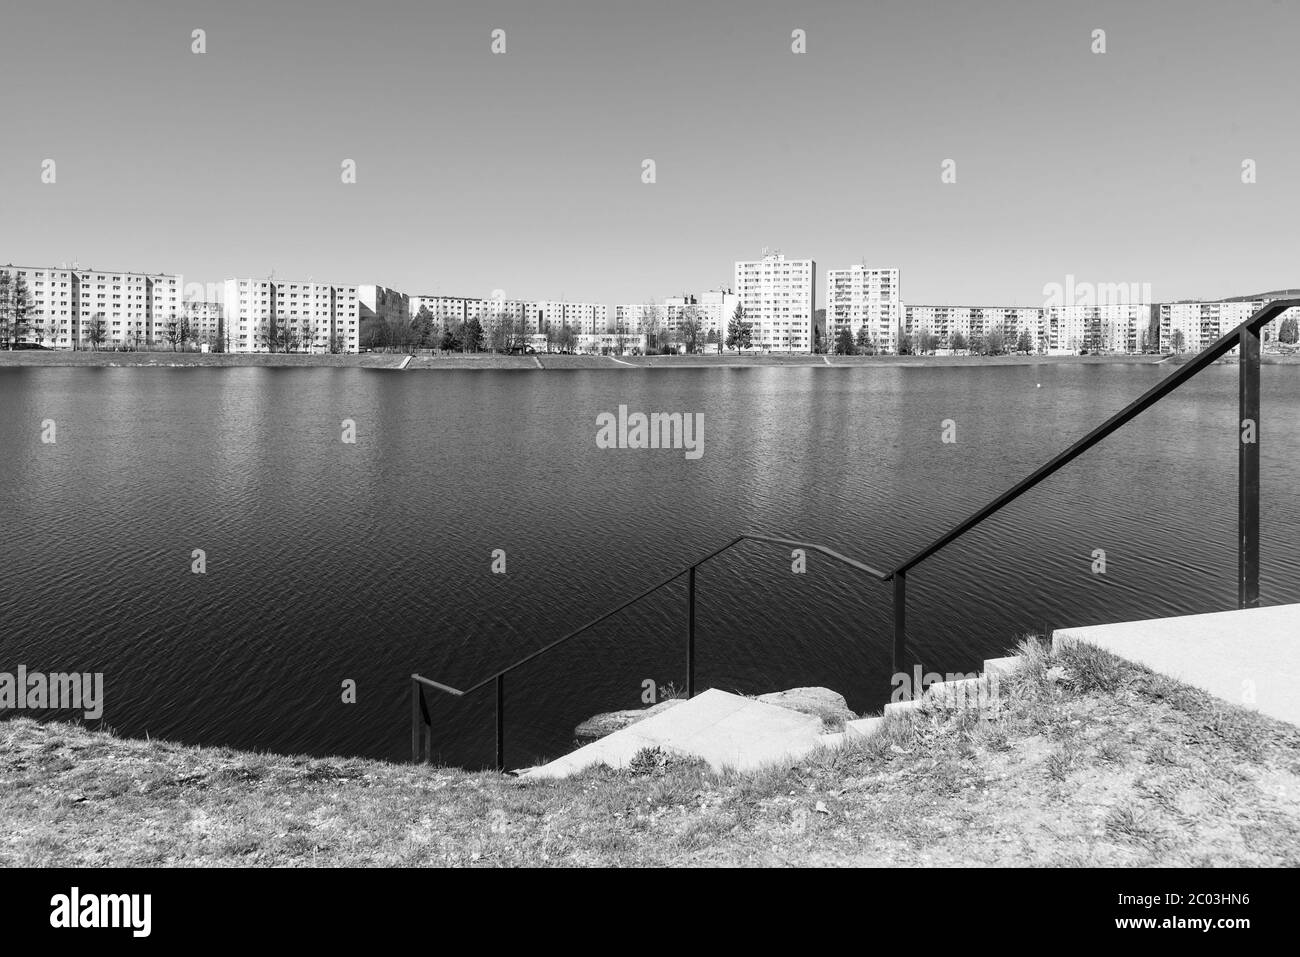 Housing estate at Mseno Reservoir. Blocks of flats at the water. Jablonec nad Nisou, Czech Republic. Black and white image. Stock Photo